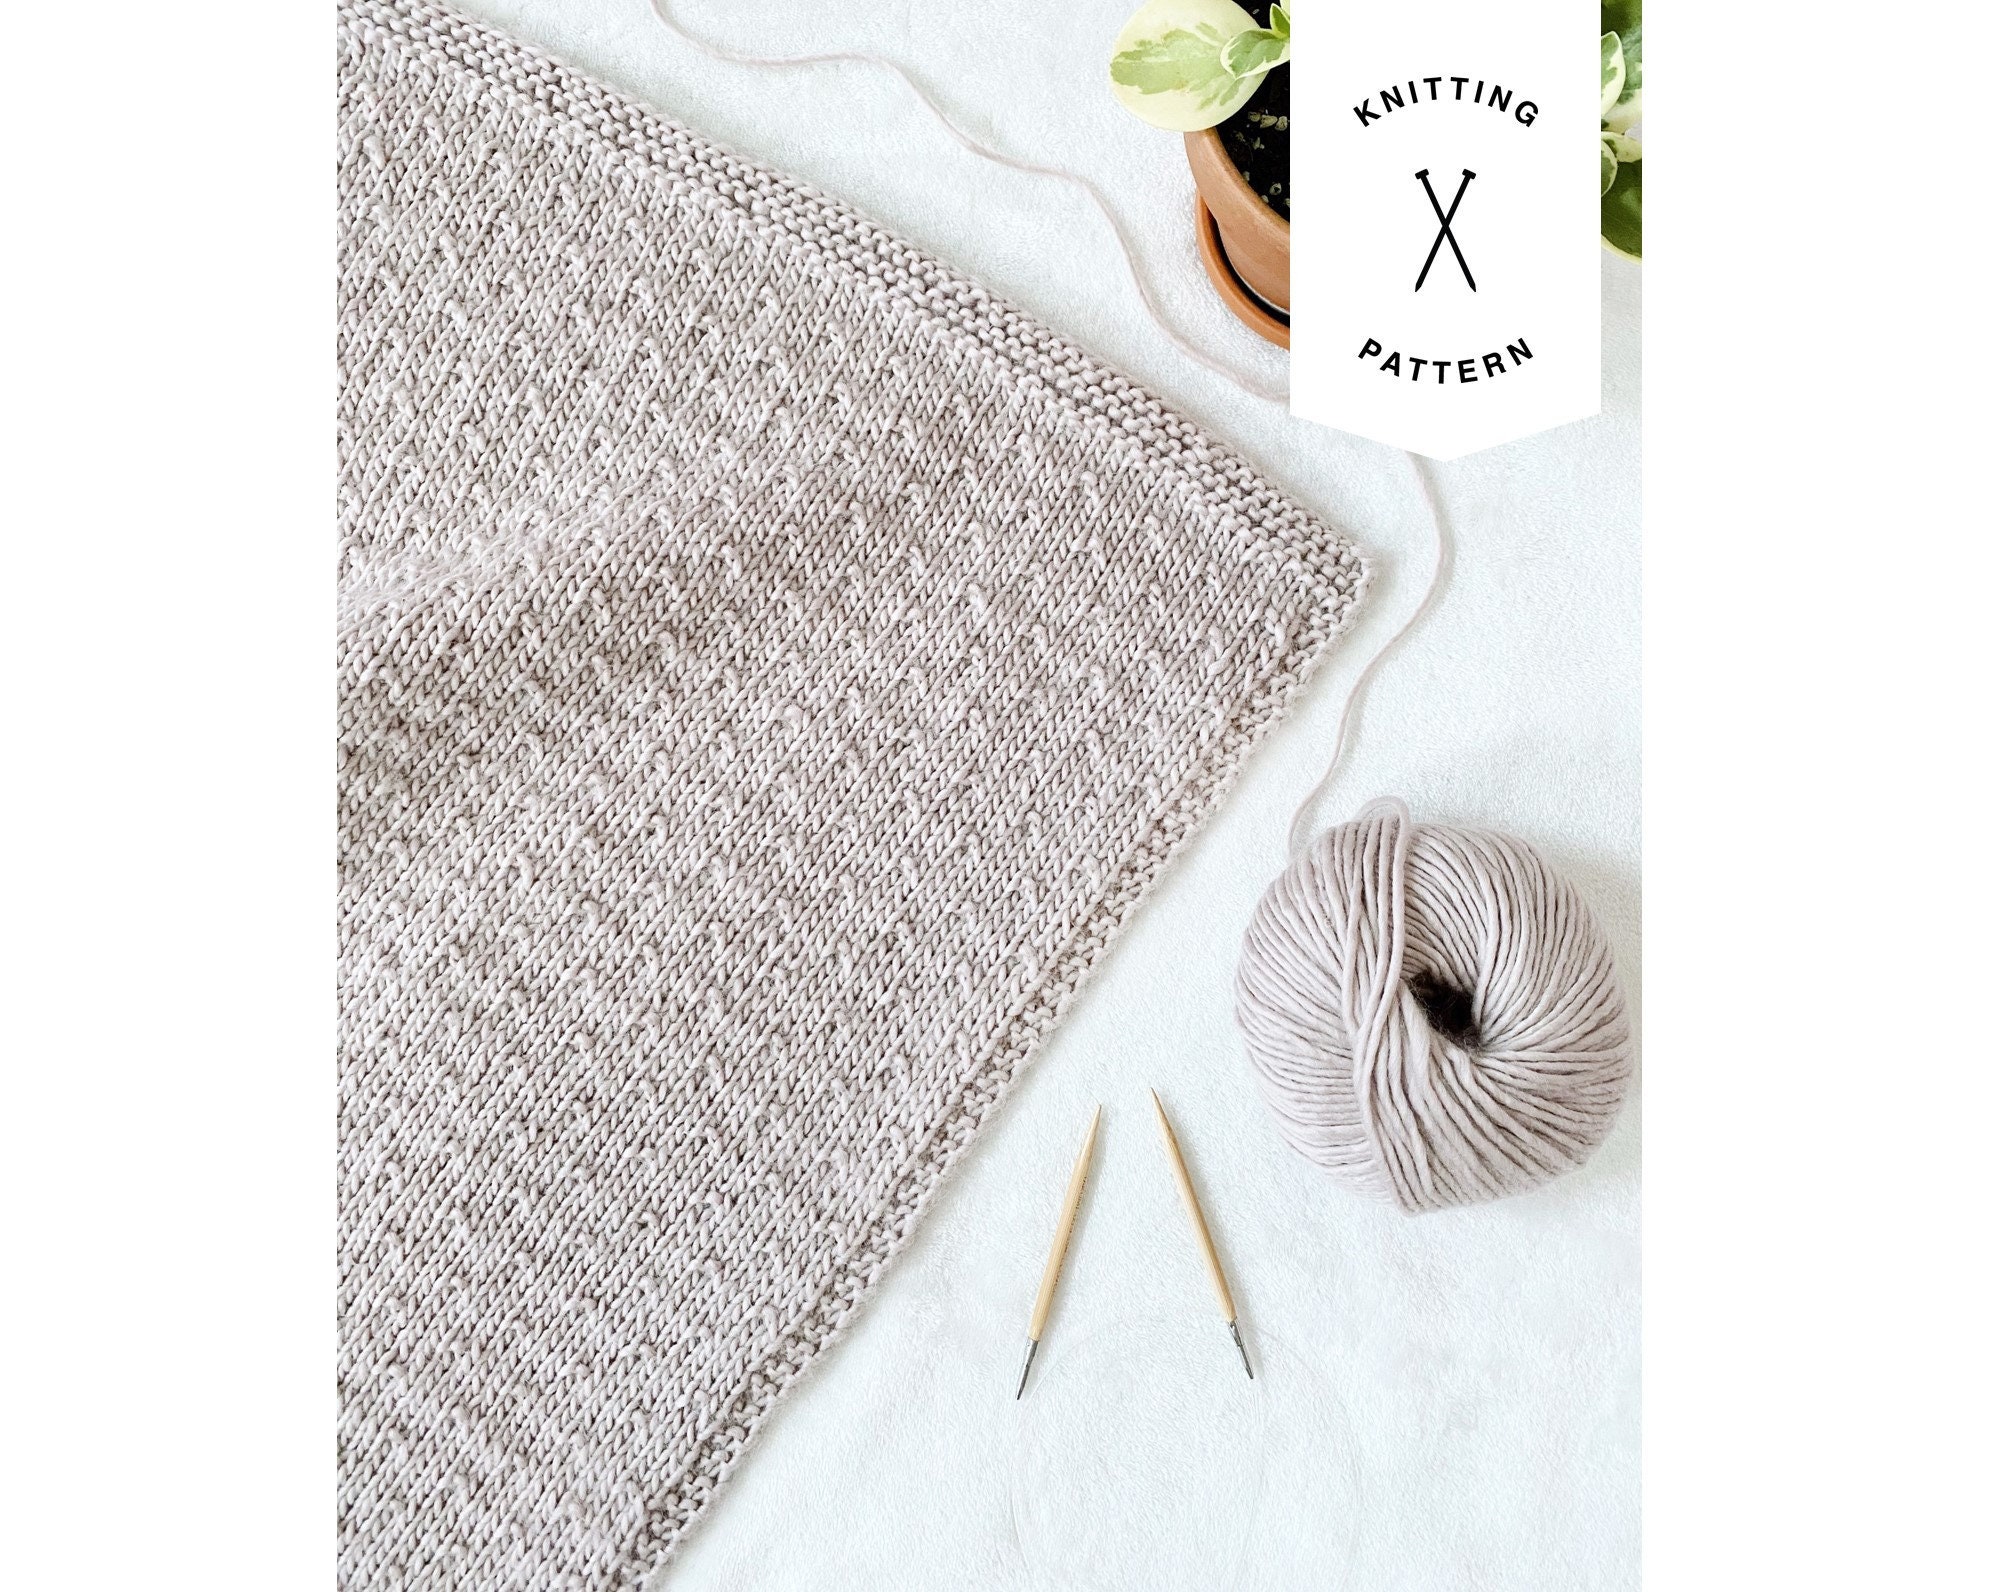 Reversible Blanket Knitting Pattern Worsted Weight Yarn - Baby Blanket -  Throw - Touch of Kindness — Fifty Four Ten Studio